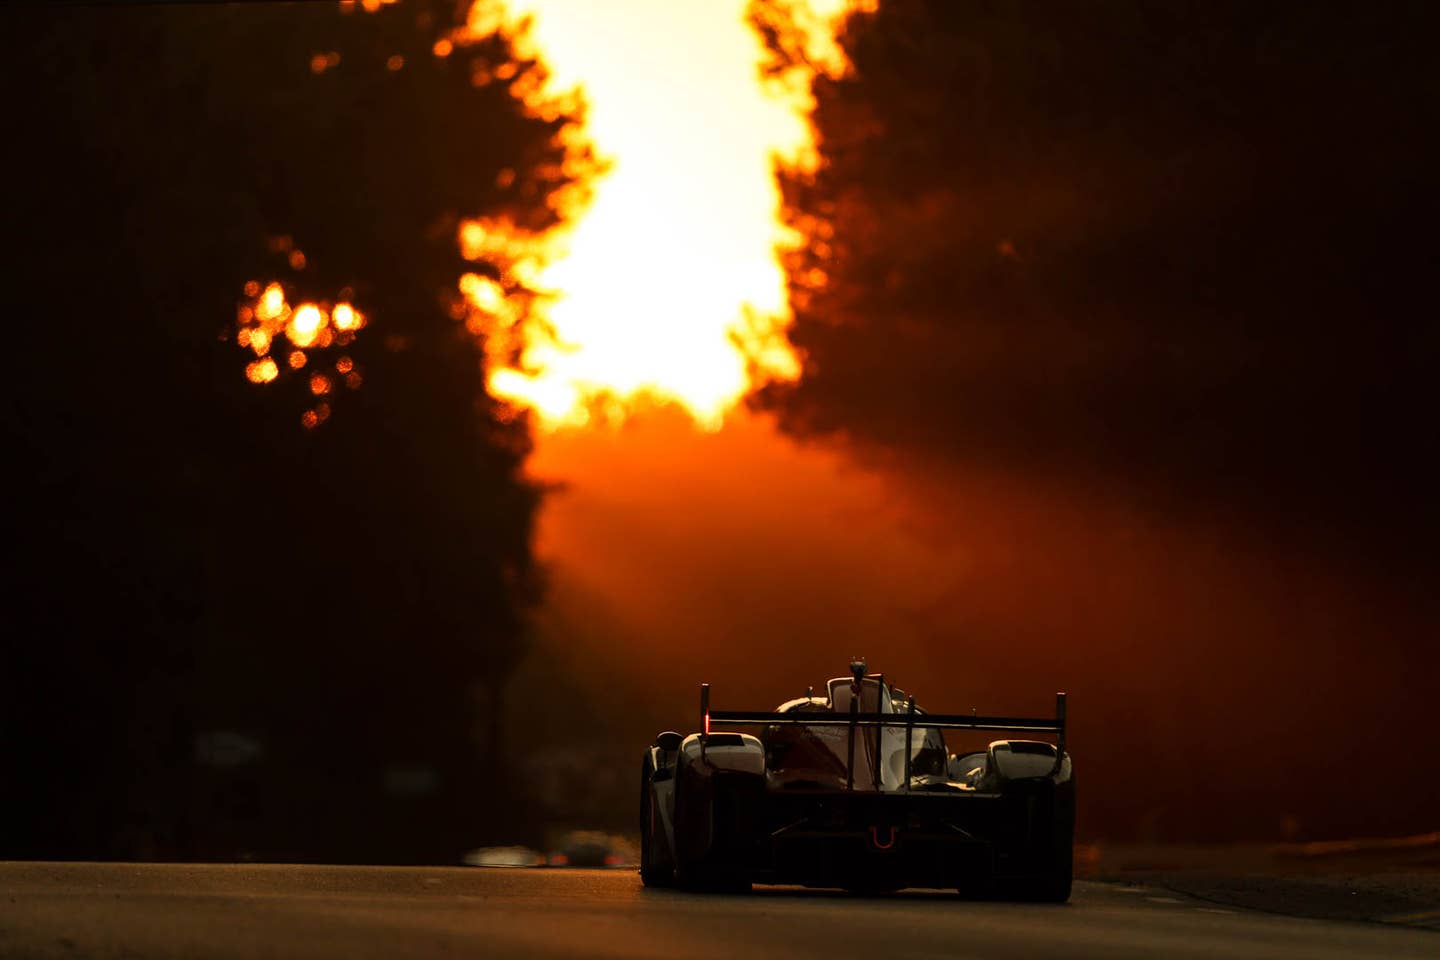 LE MANS, FRANCE - JUNE 12: The #08 Toyota Gazoo Racing GR010 Hybrid of Sebastien Buemi, Brendon Hartley, and Ryo Hirakawa in action at sunrise at the Le Mans 24 Hours Race on June 12, 2022 in Le Mans, France. (Photo by James Moy Photography/Getty Images)